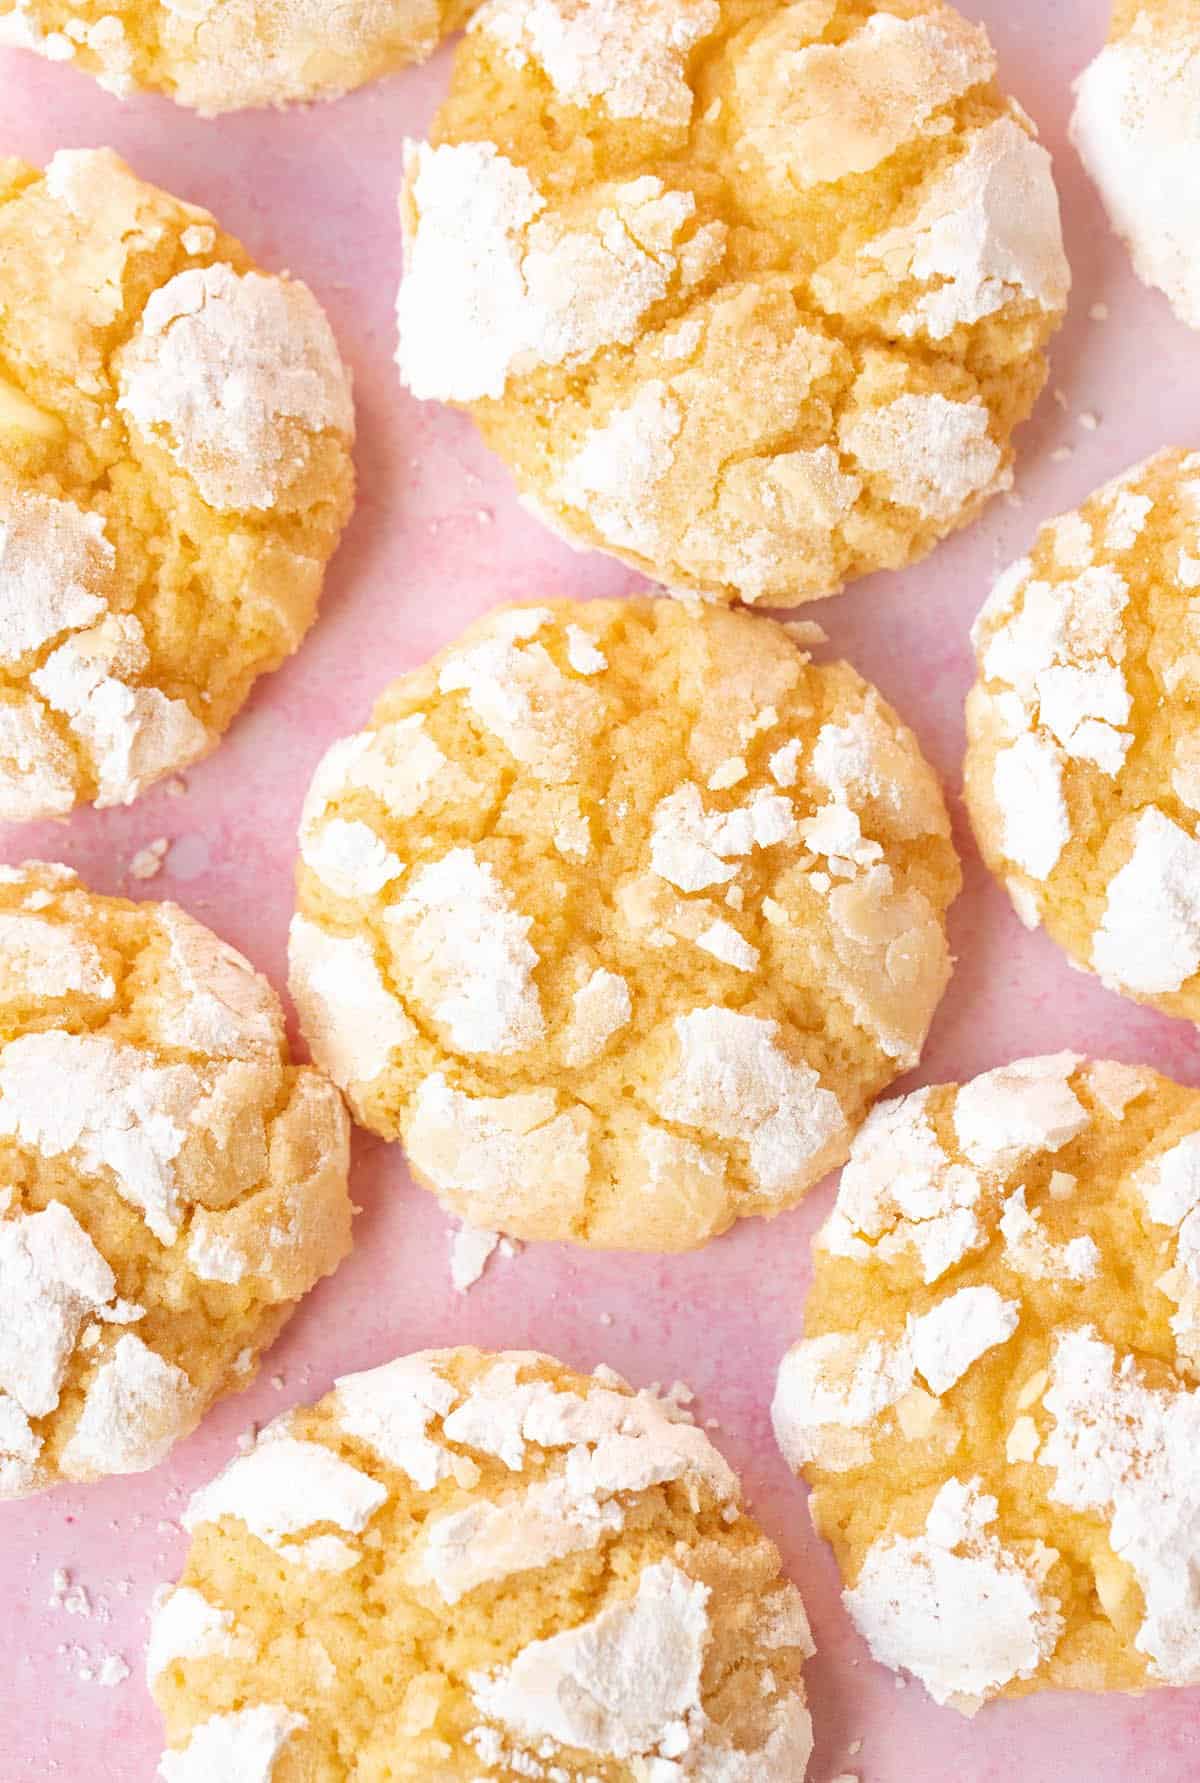 Top view of beautiful Lemon Crinkle Cookies on a white background.